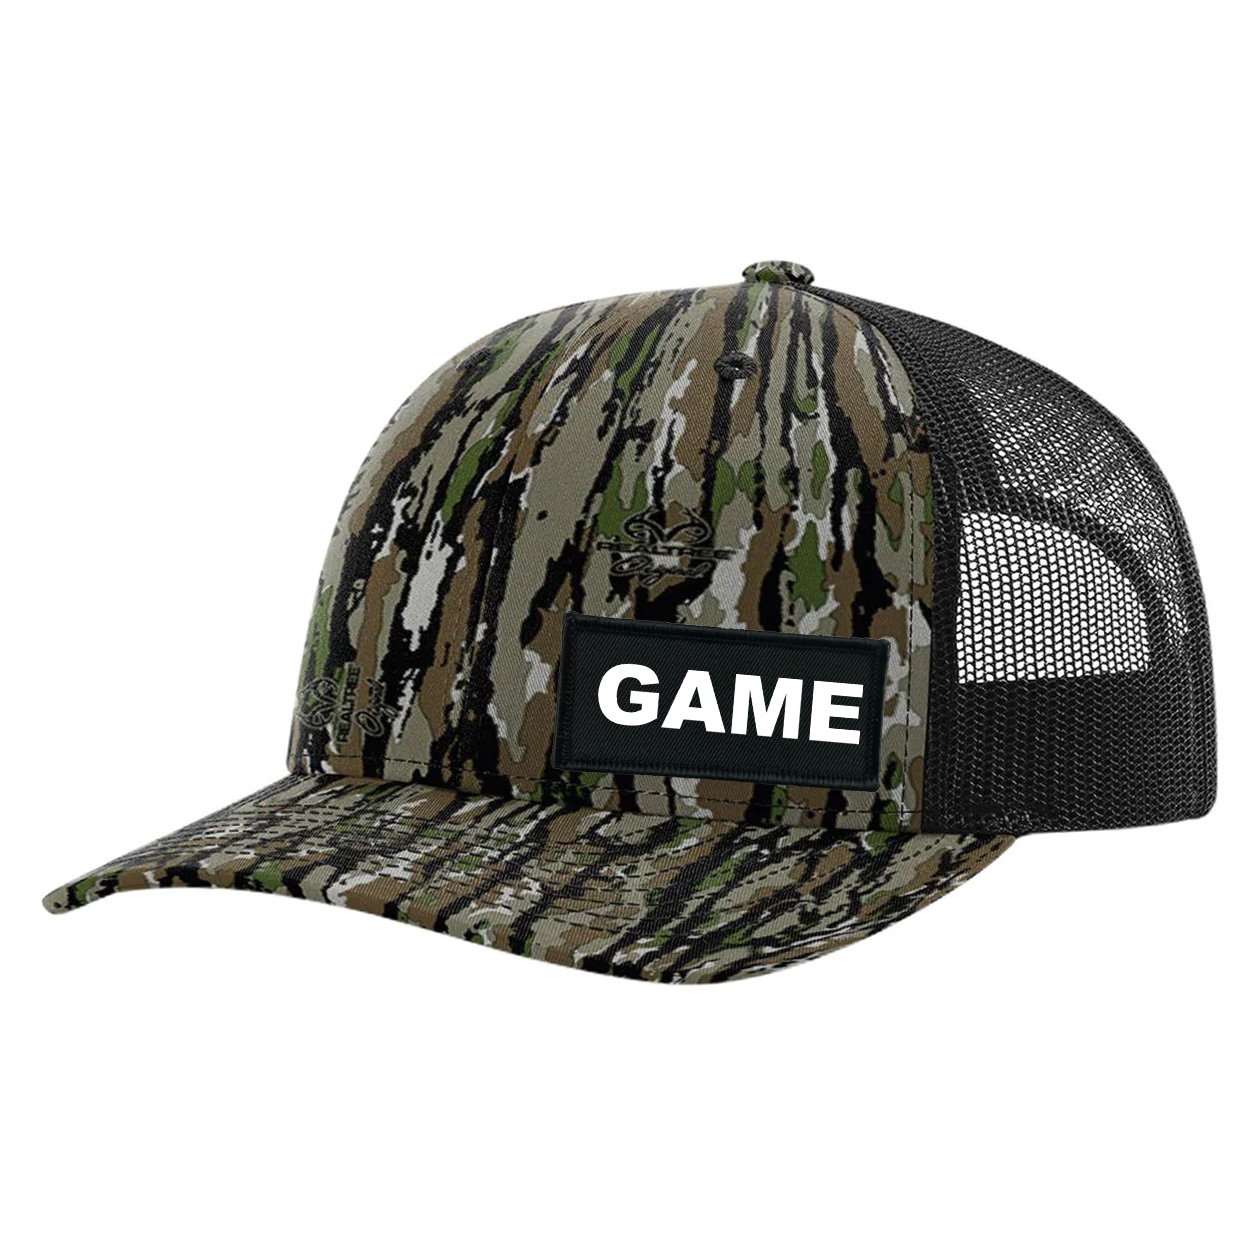 Game Brand Logo Night Out Woven Patch Snapback Trucker Hat Realtree Original/ Black